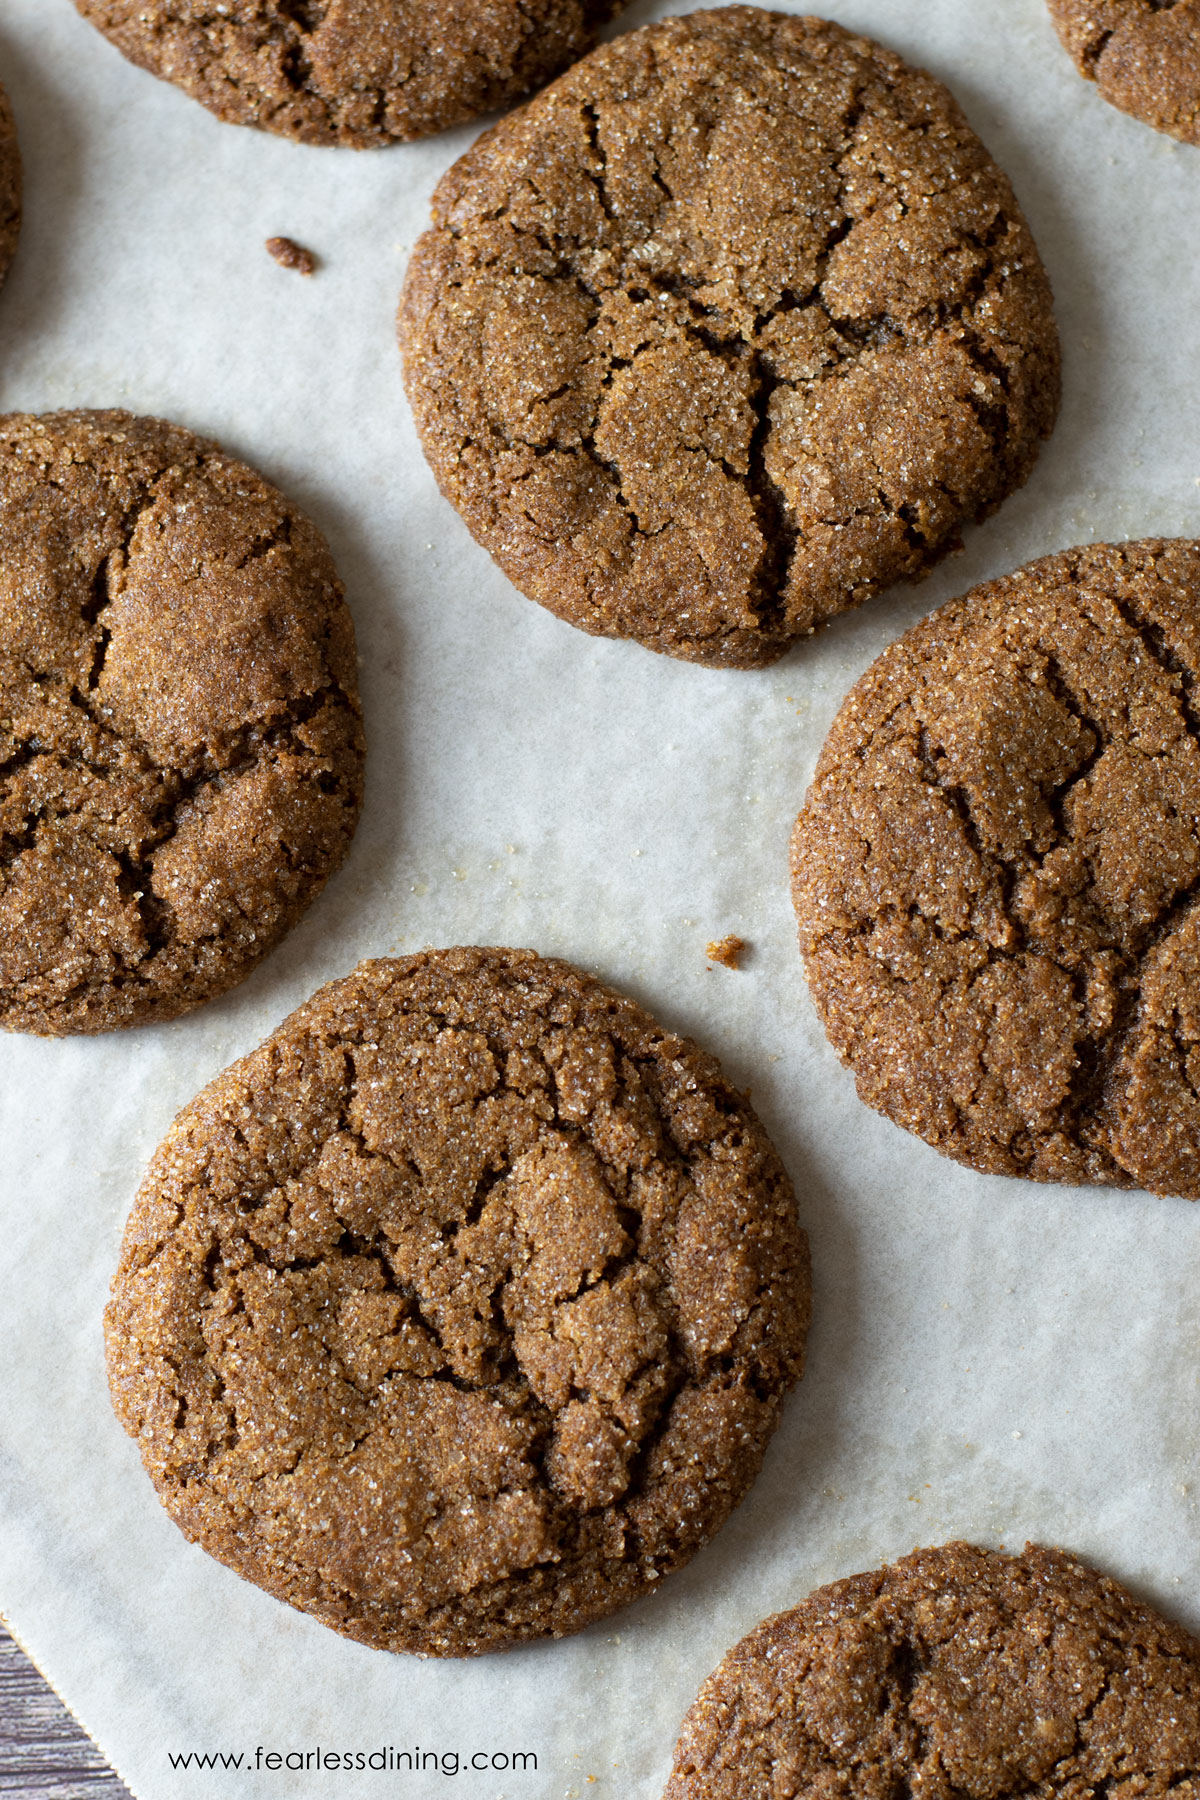 A photo of baked gluten free gingerdoodle cookies.